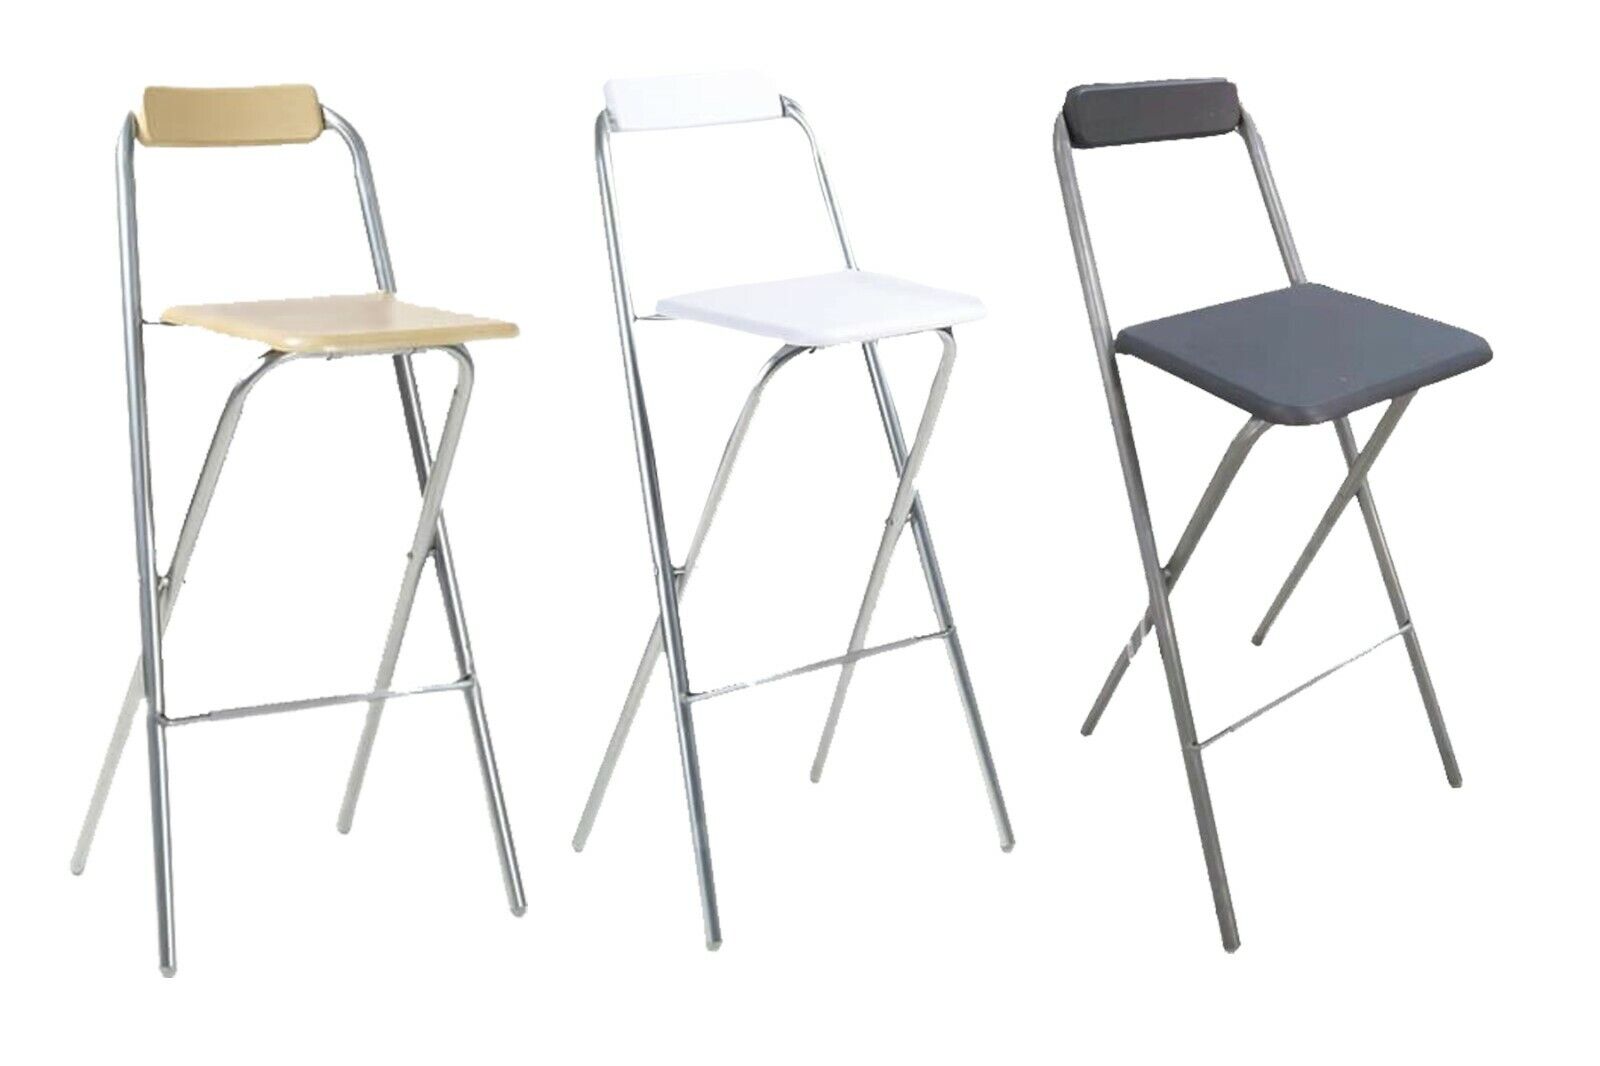 Folding Stool Chair For Breakfast Home Kitchen Office School Cafe Use